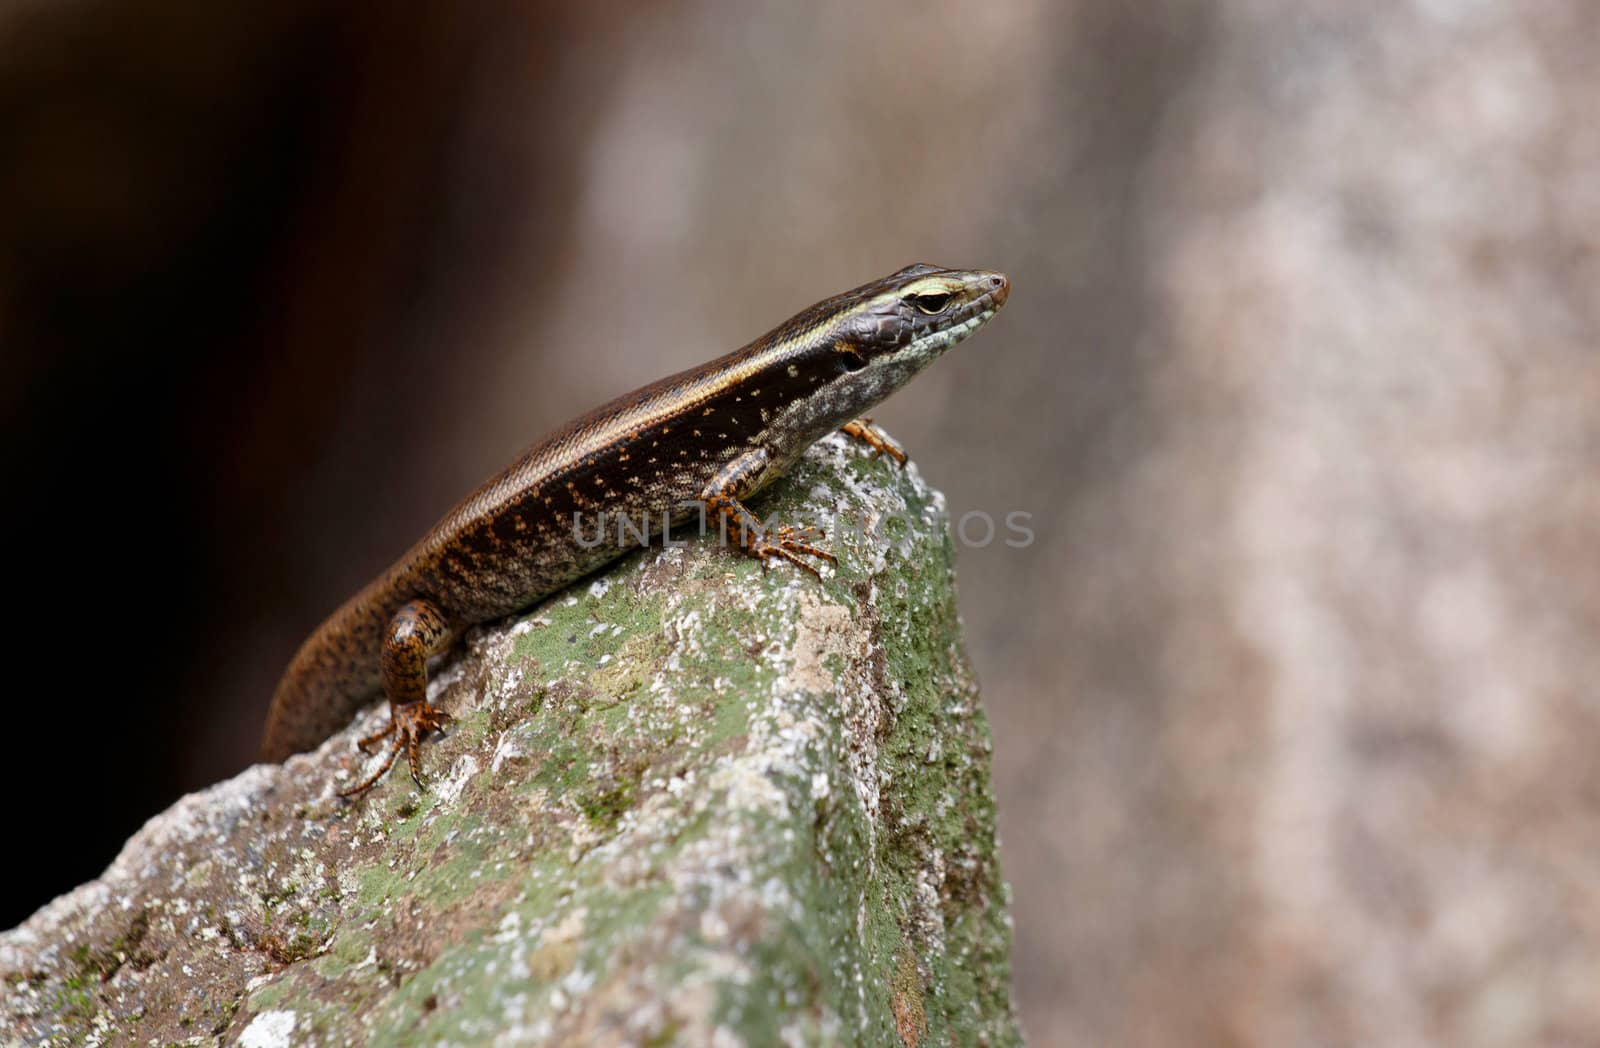 skink lizard sits in the sun on a rock